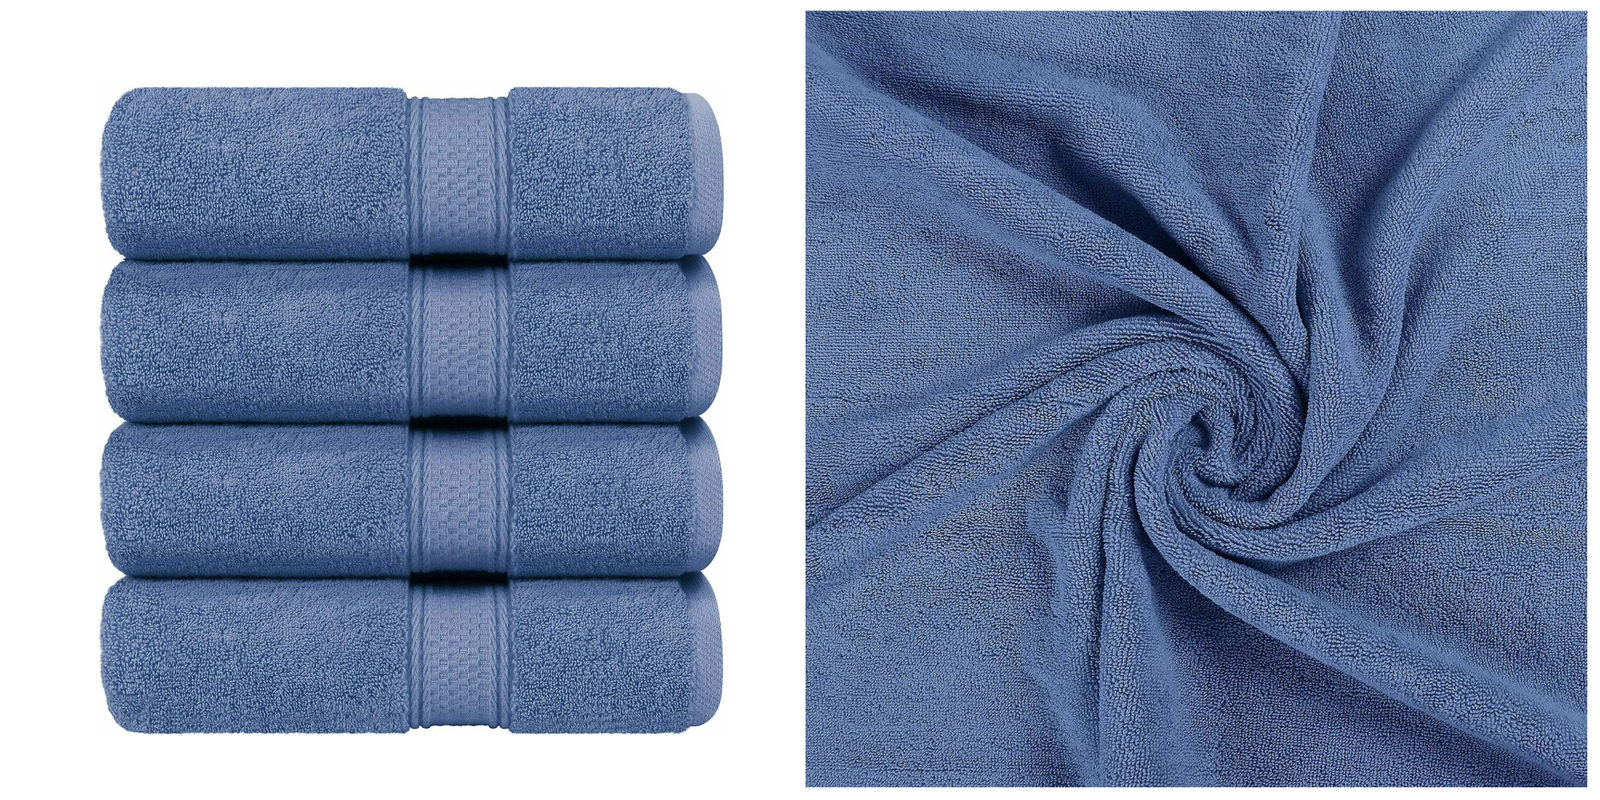 4 Pack 600 GSM Cotton Bath Towels Set 27x54 Inches - Wedgewood - P01 - $78.39